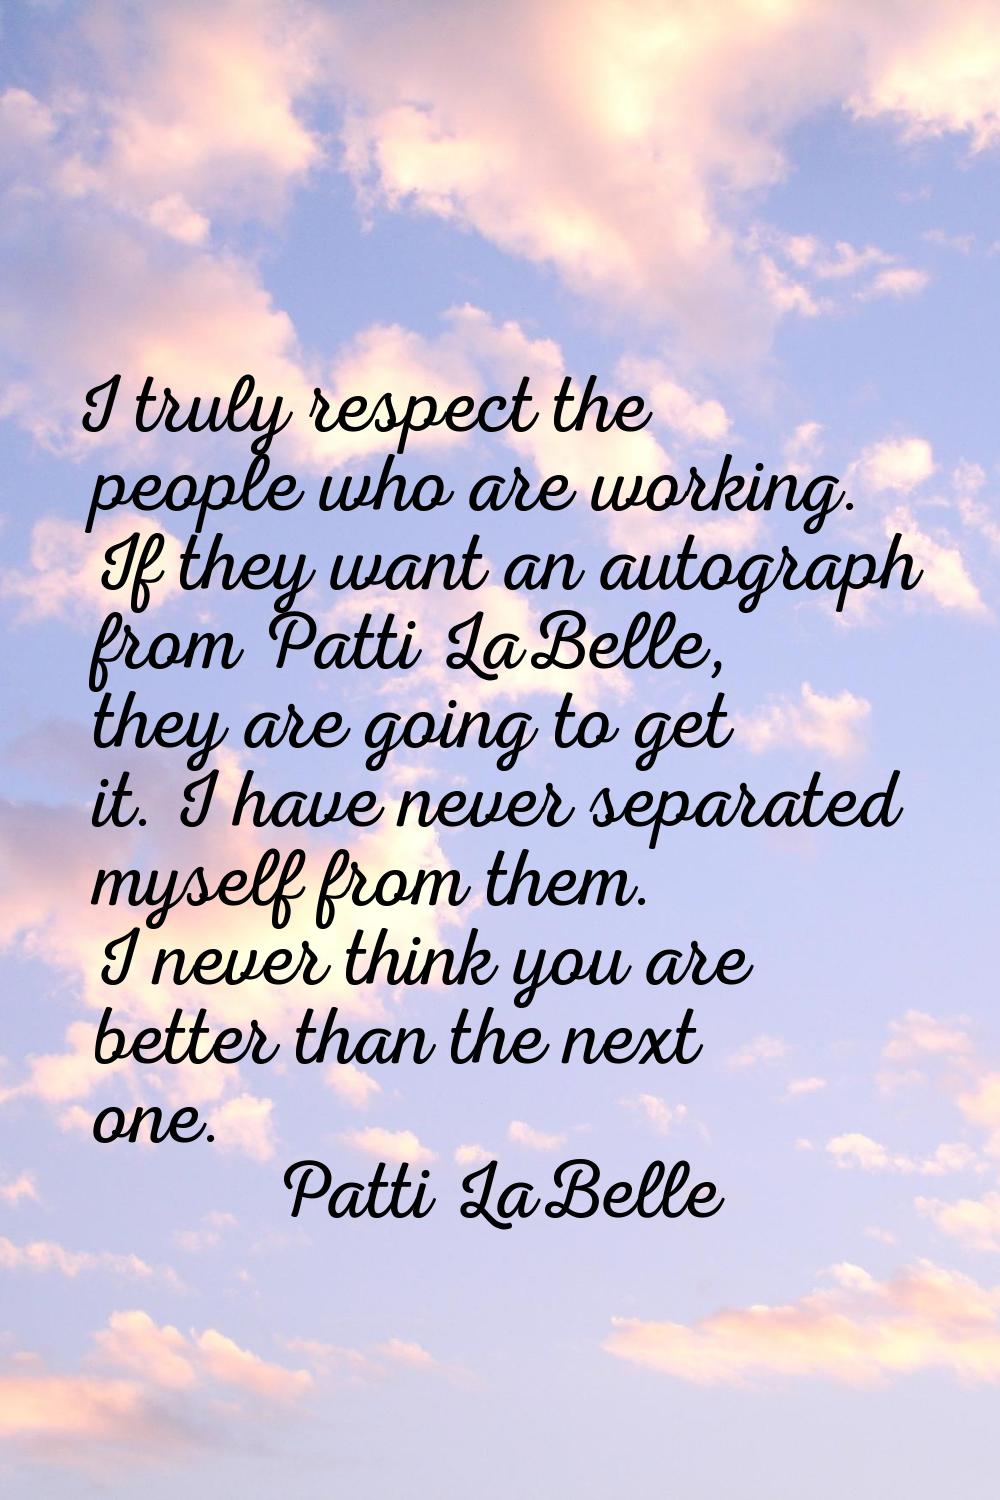 I truly respect the people who are working. If they want an autograph from Patti LaBelle, they are 